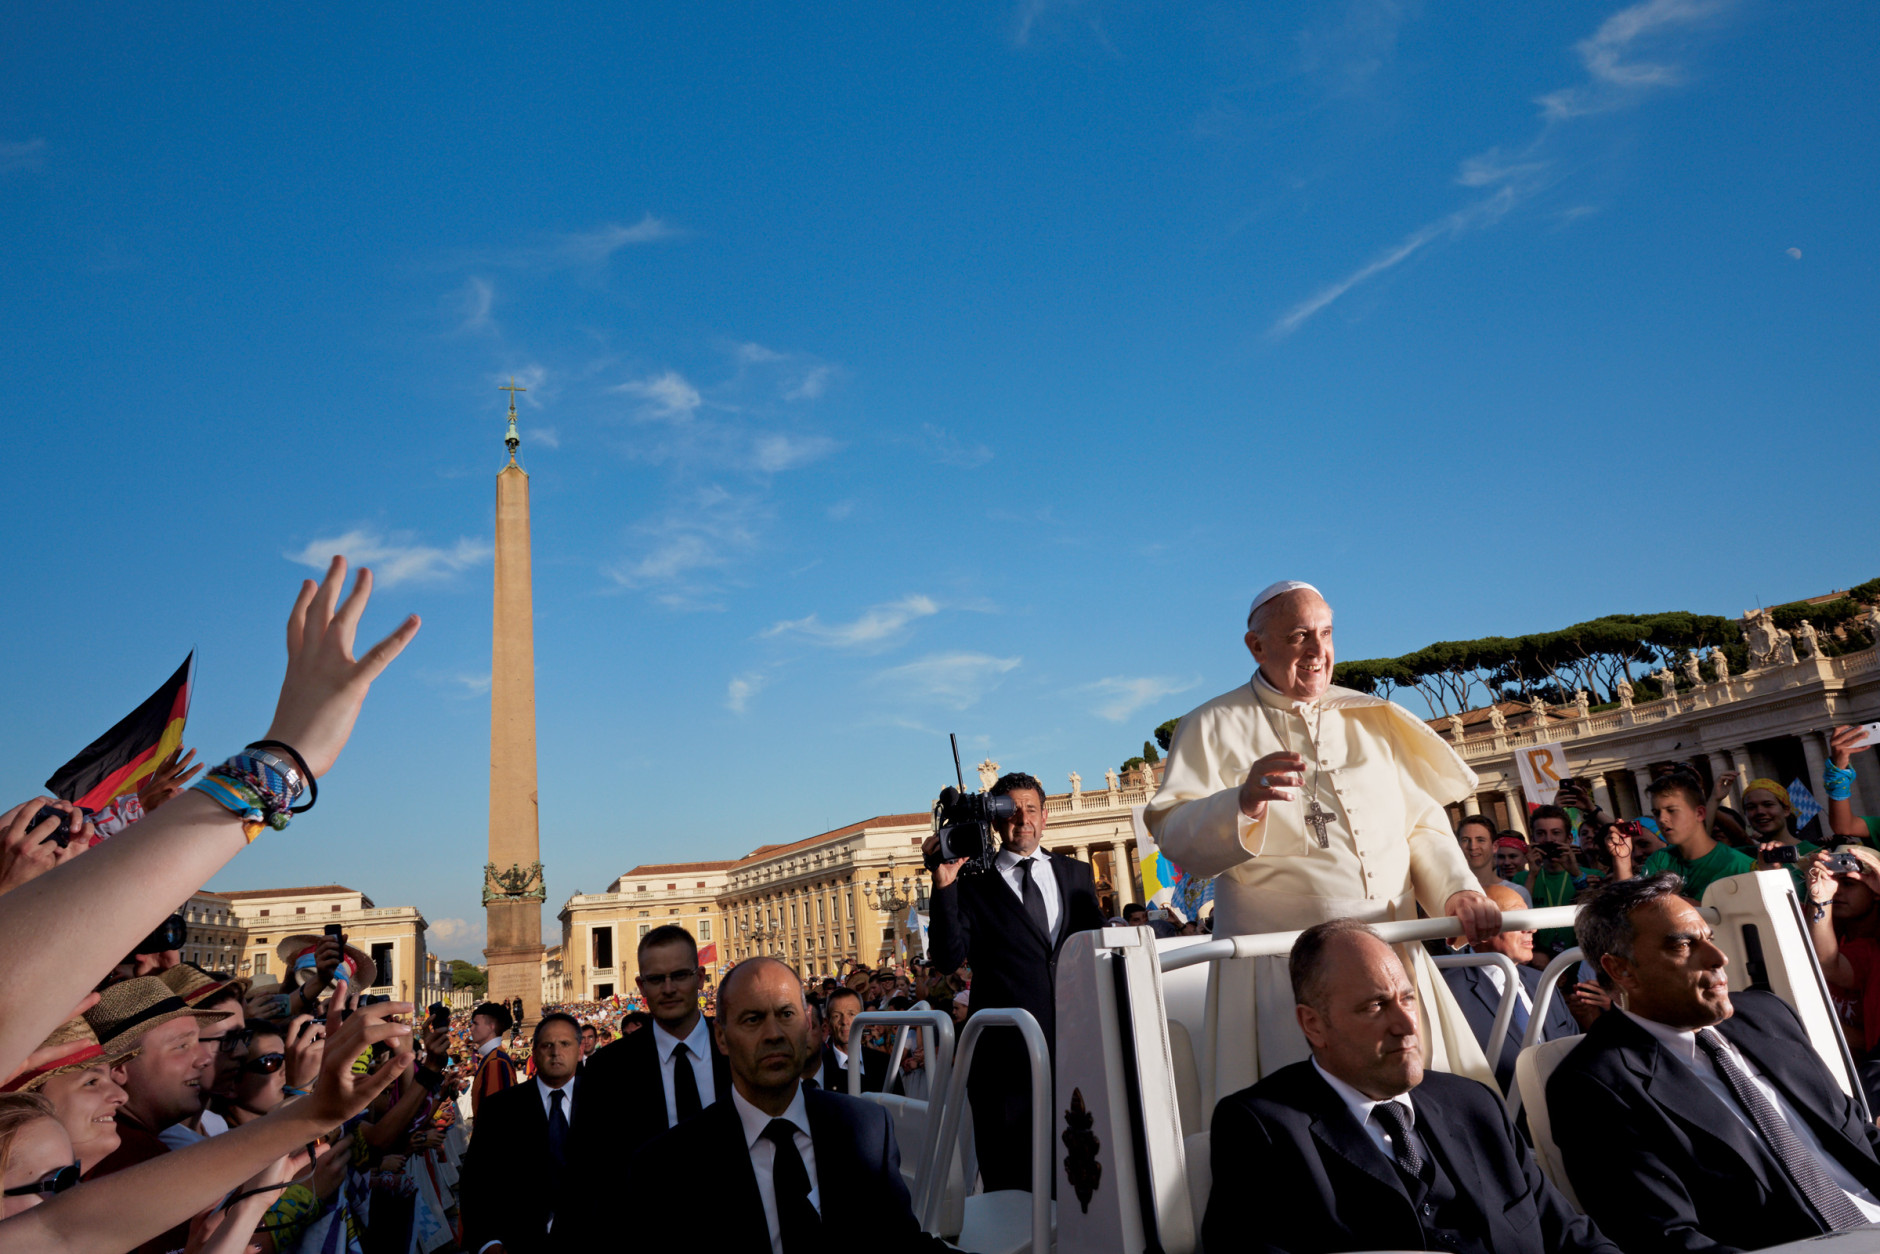 The open-topped Popemobile carries Pope Francis through a delighted crowd during a Wednesday general audience in St. Peter’s Square. (Dave Yoder/National Geographic)